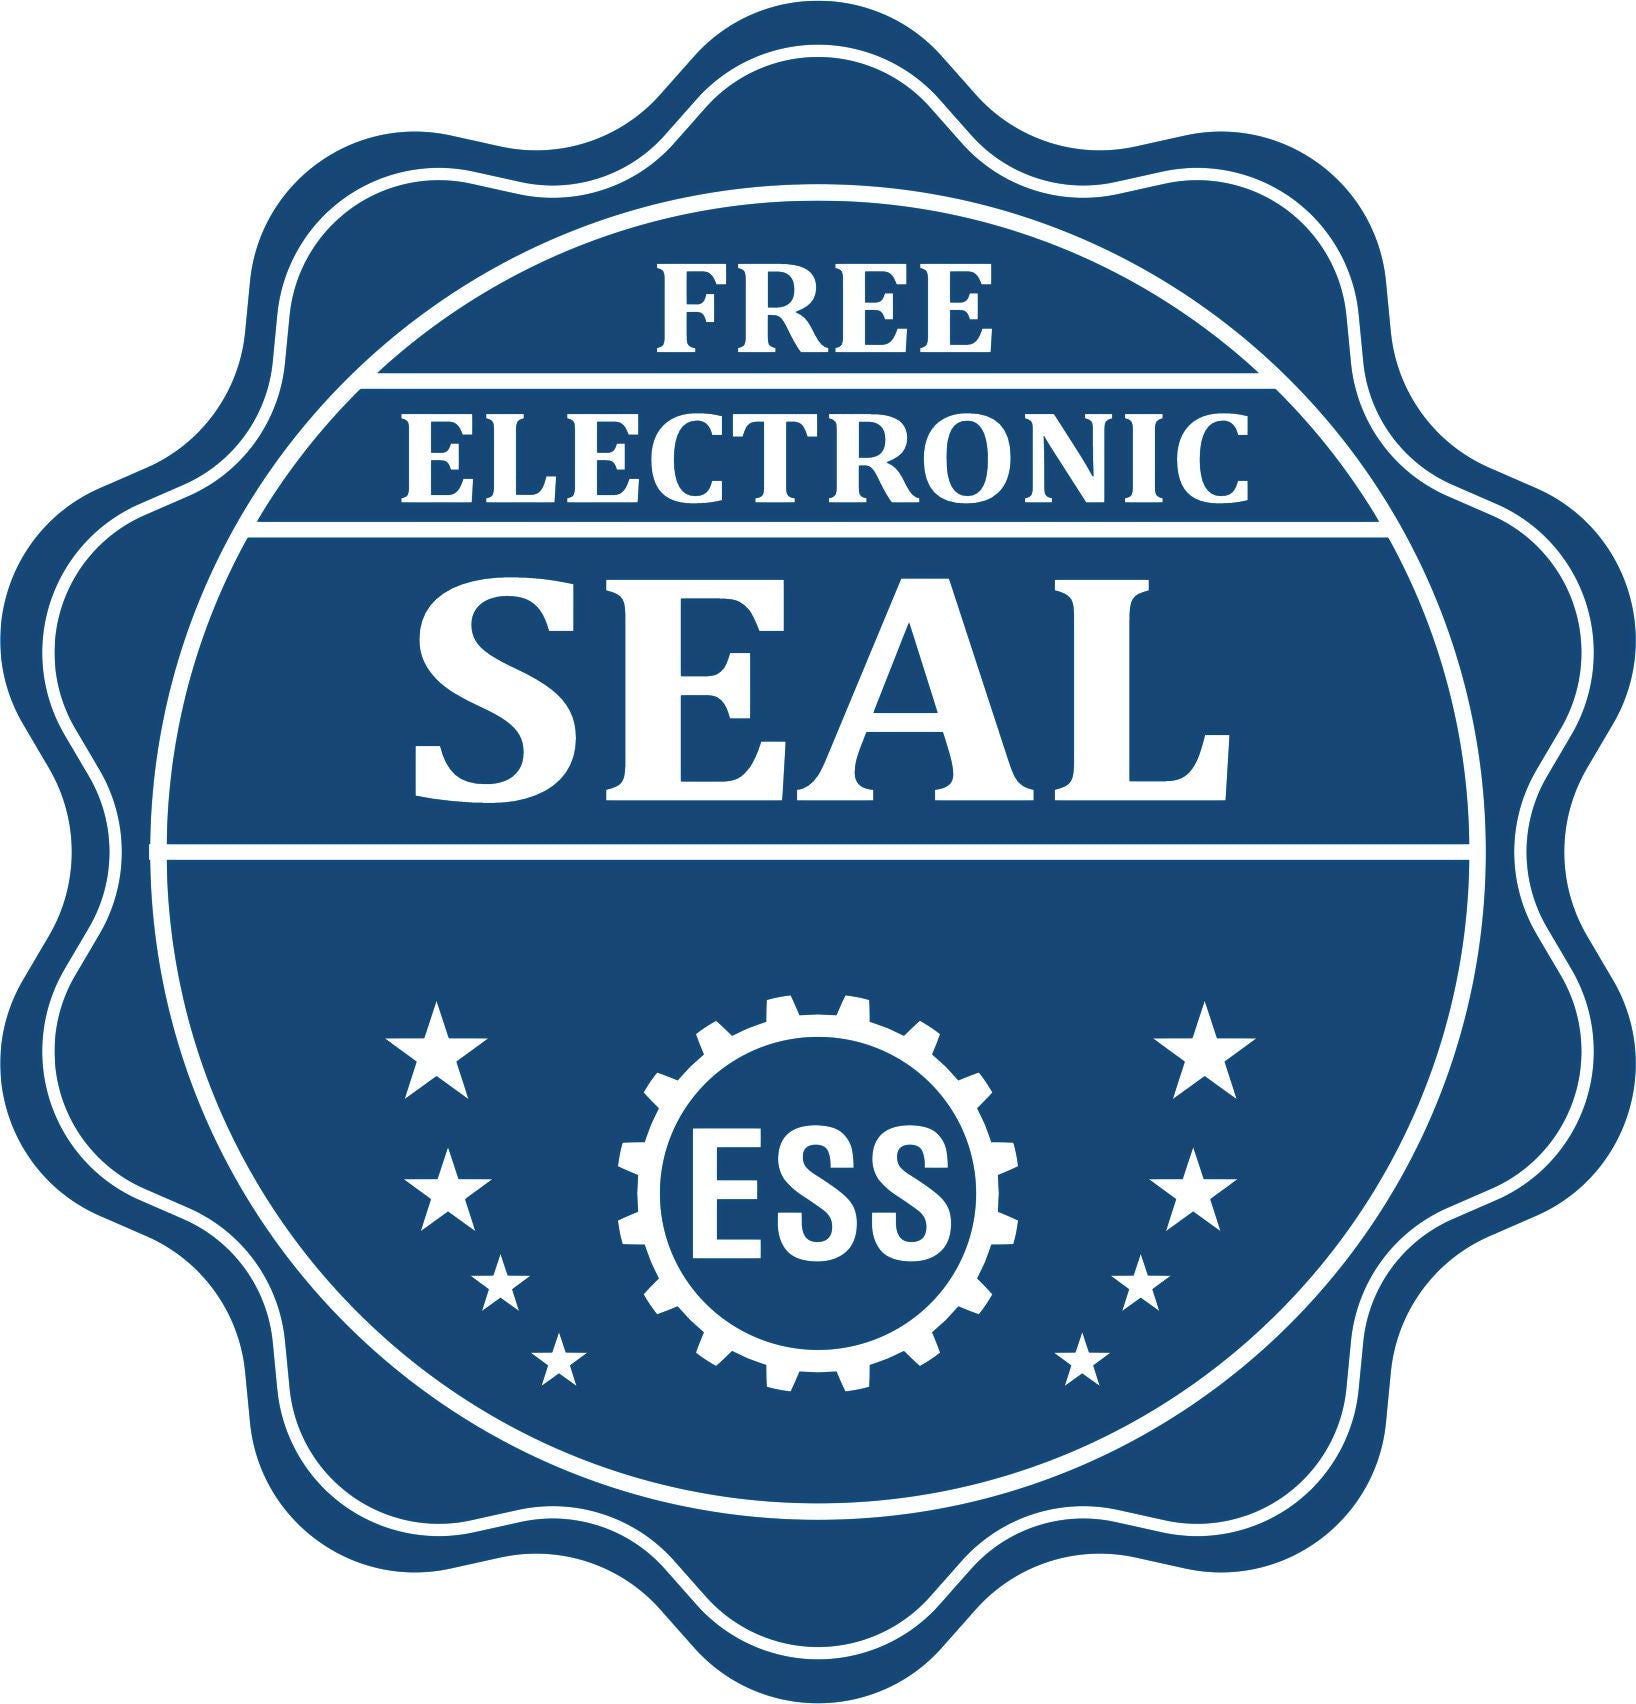 A badge showing a free electronic seal for the Extended Long Reach New Mexico Surveyor Embosser with stars and the ESS gear on the emblem.